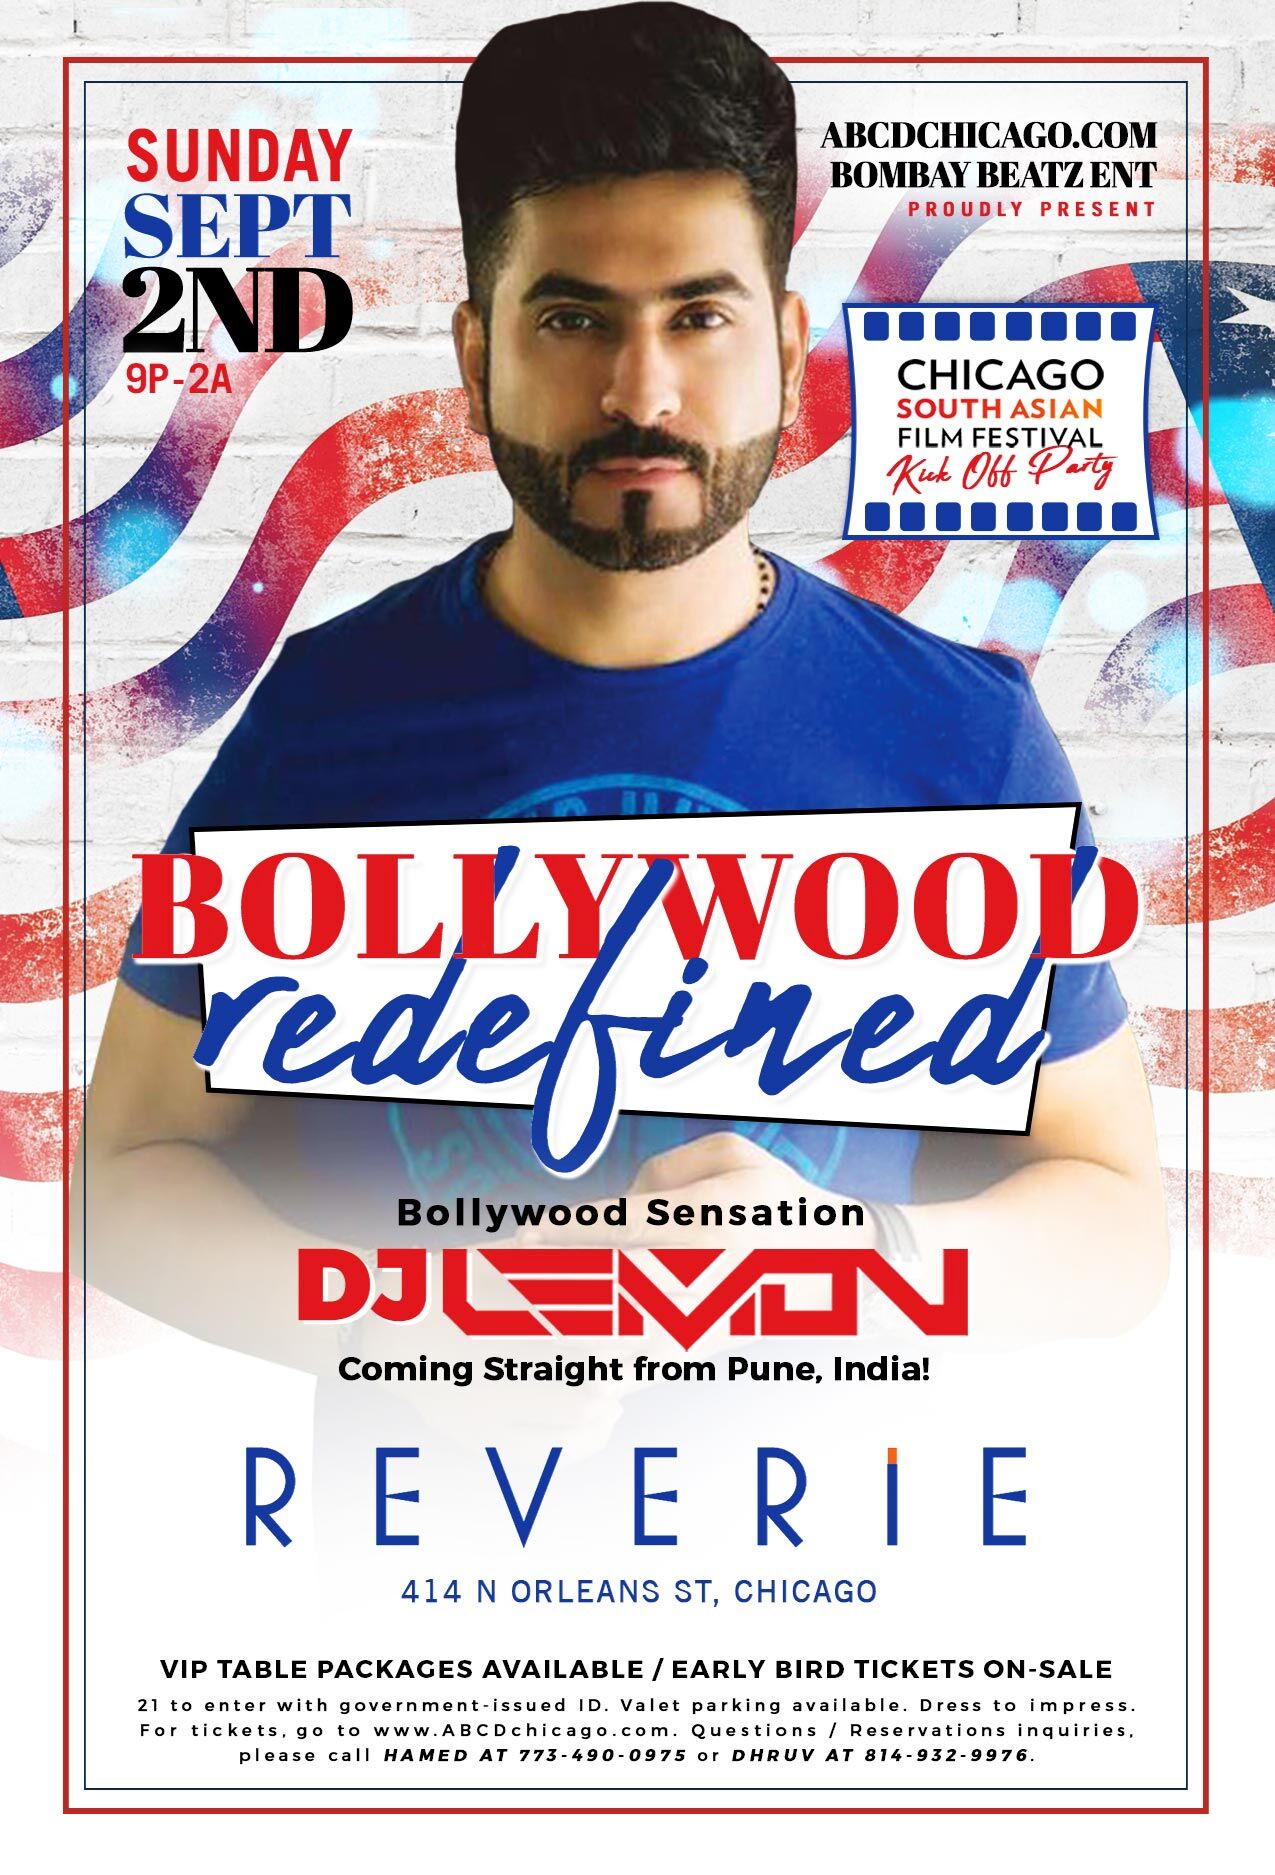 BOLLYWOOD REDEFINED feat. India's DJ Lemon!